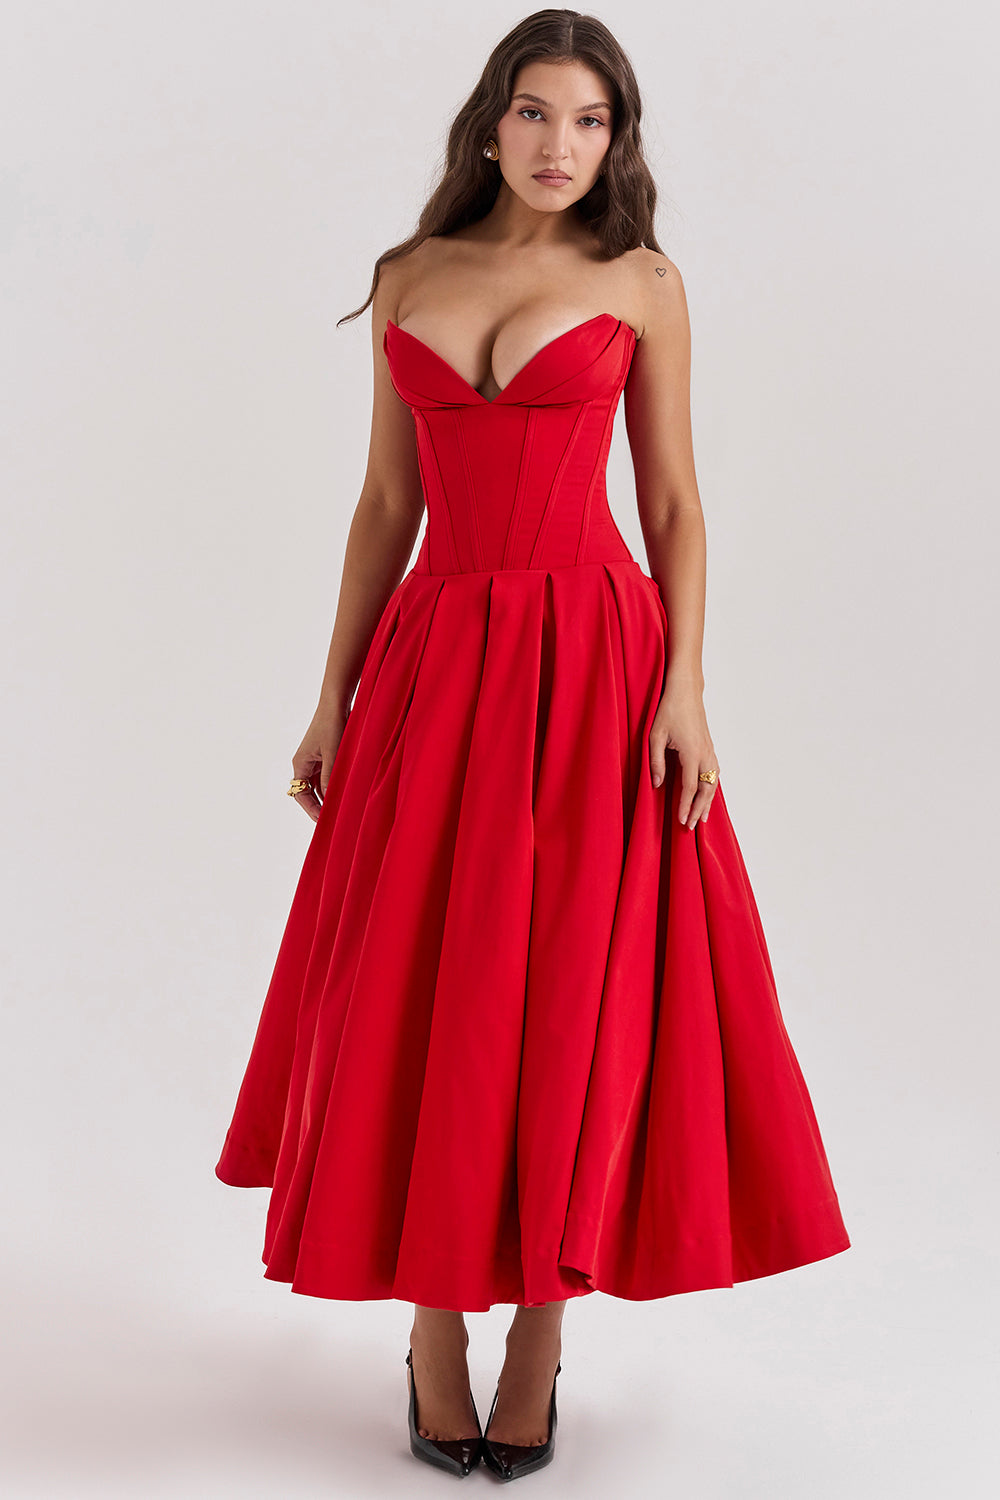 Hire HOUSE OF CB Lady Strapless Midi Dress in Scarlet Red